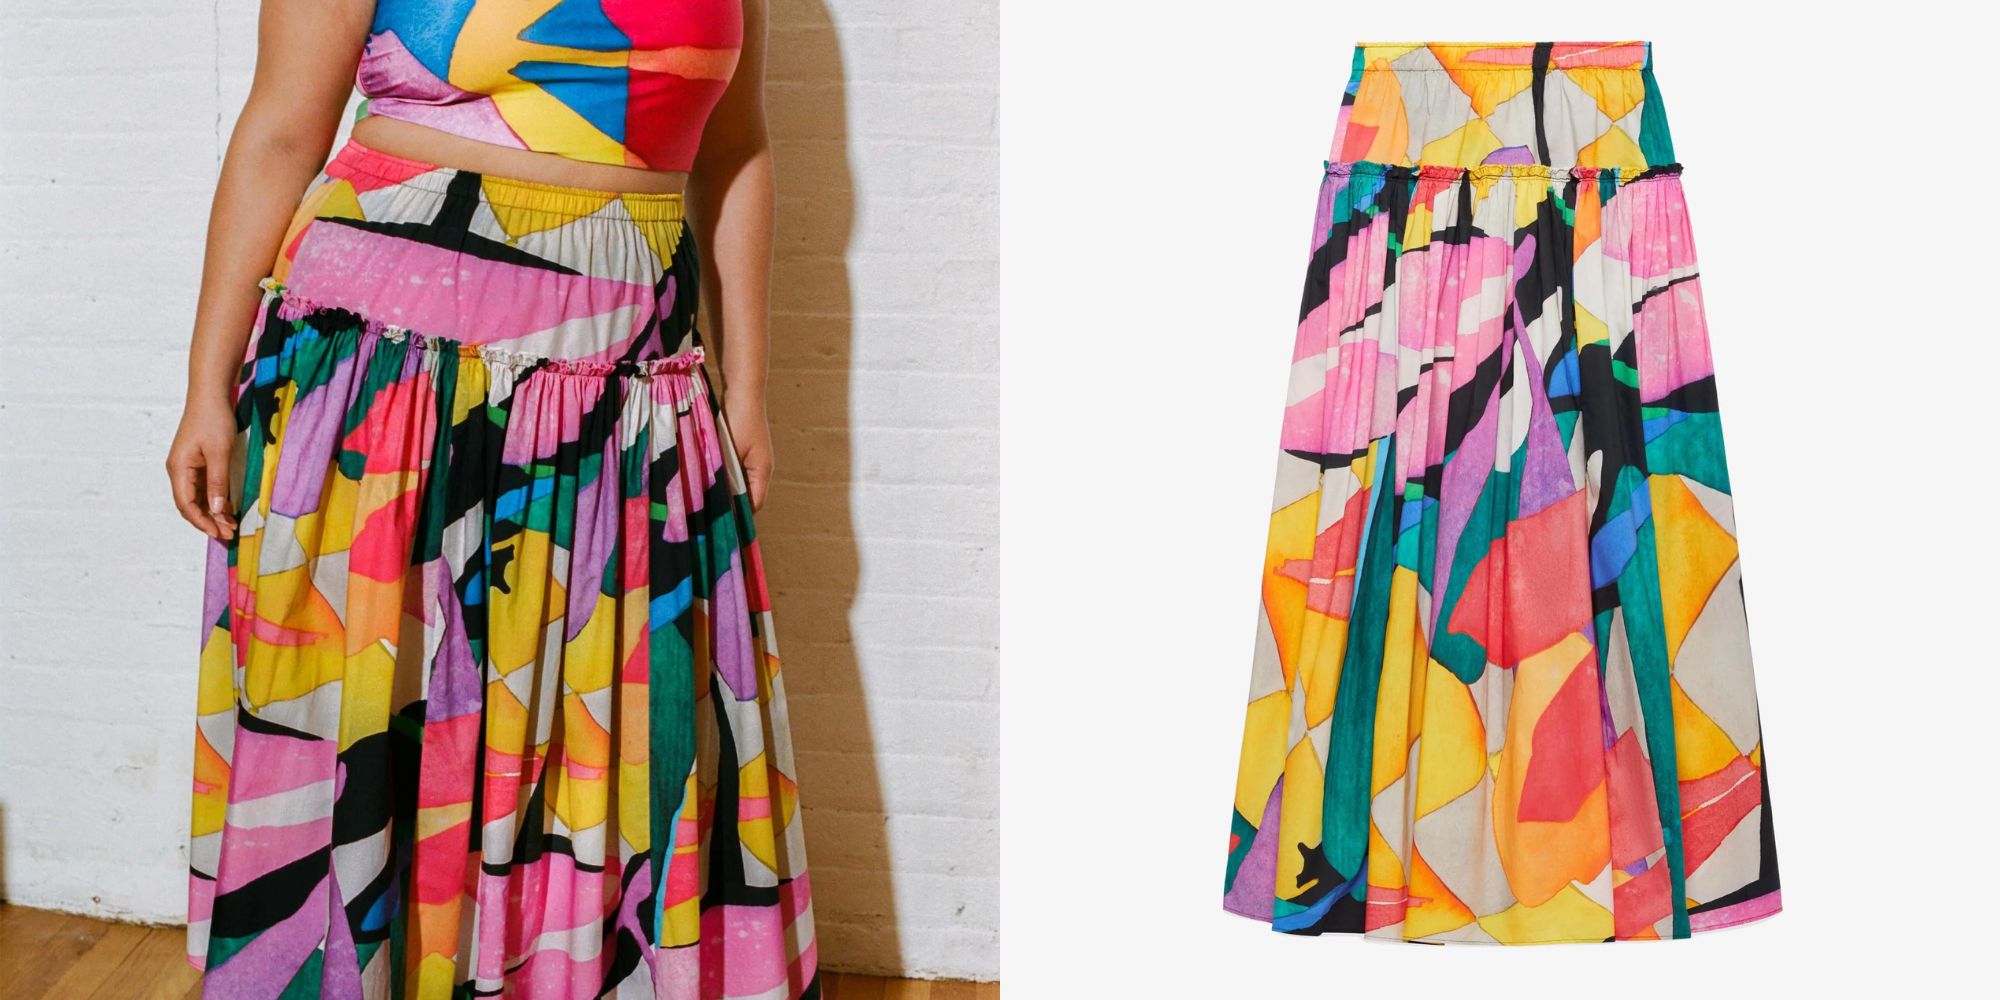 21 Ethical, Fun, and Colourful Clothing Brands - Good On You